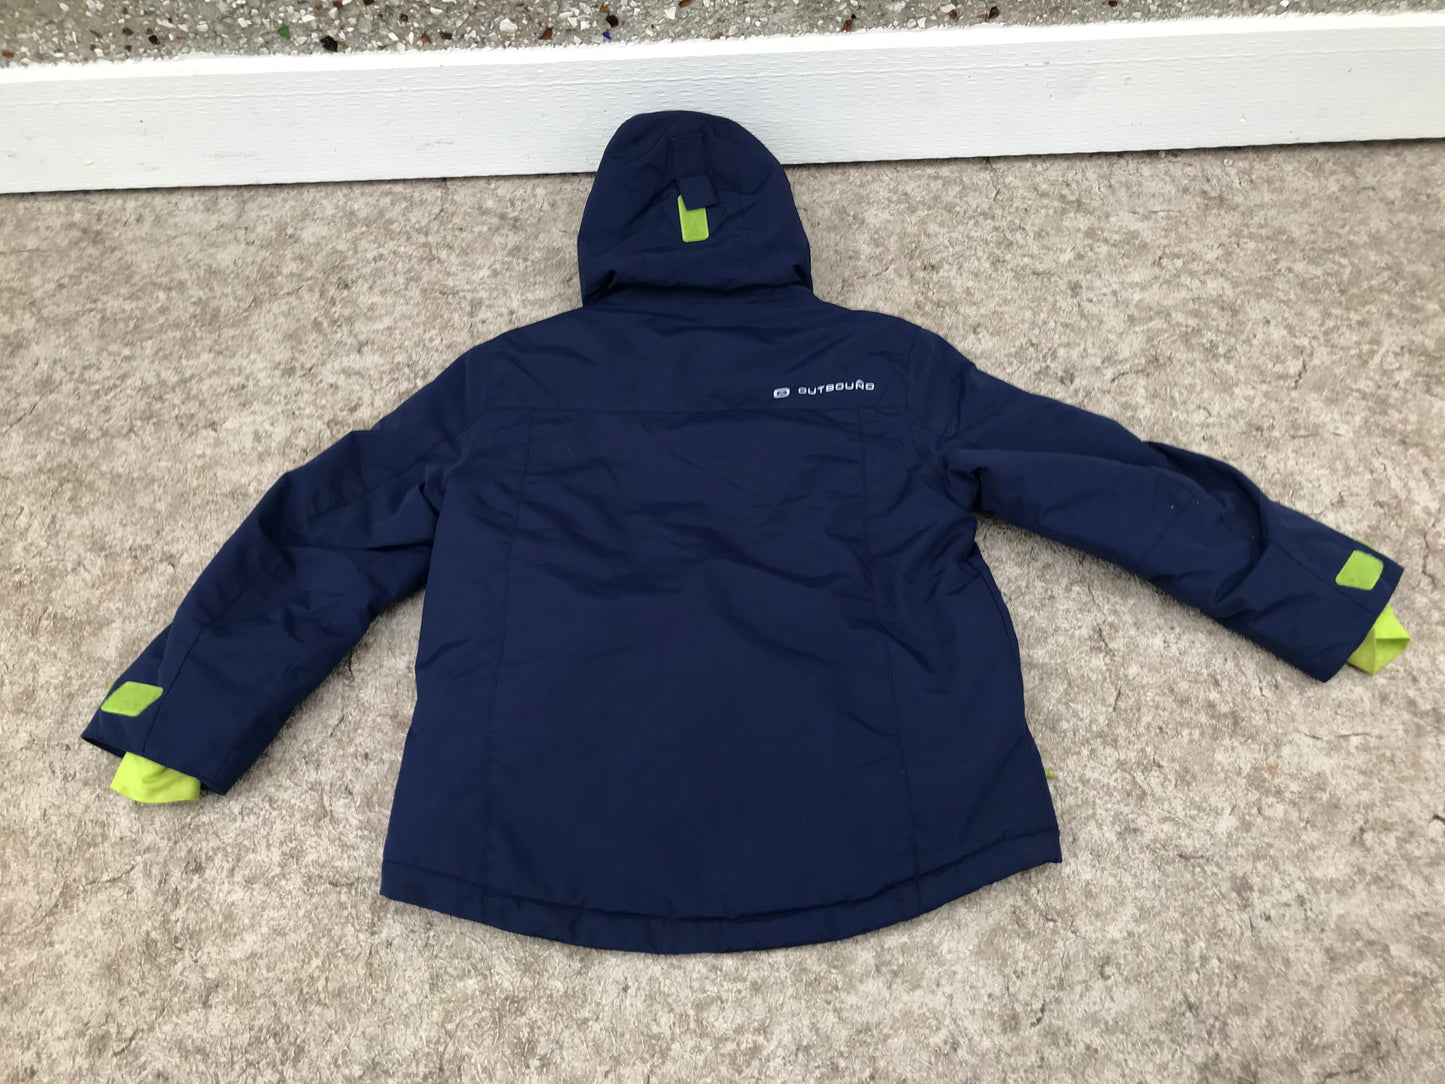 Winter Coat Child Size 7-8 Outbound Marine Blue and Lime With Snow Belt